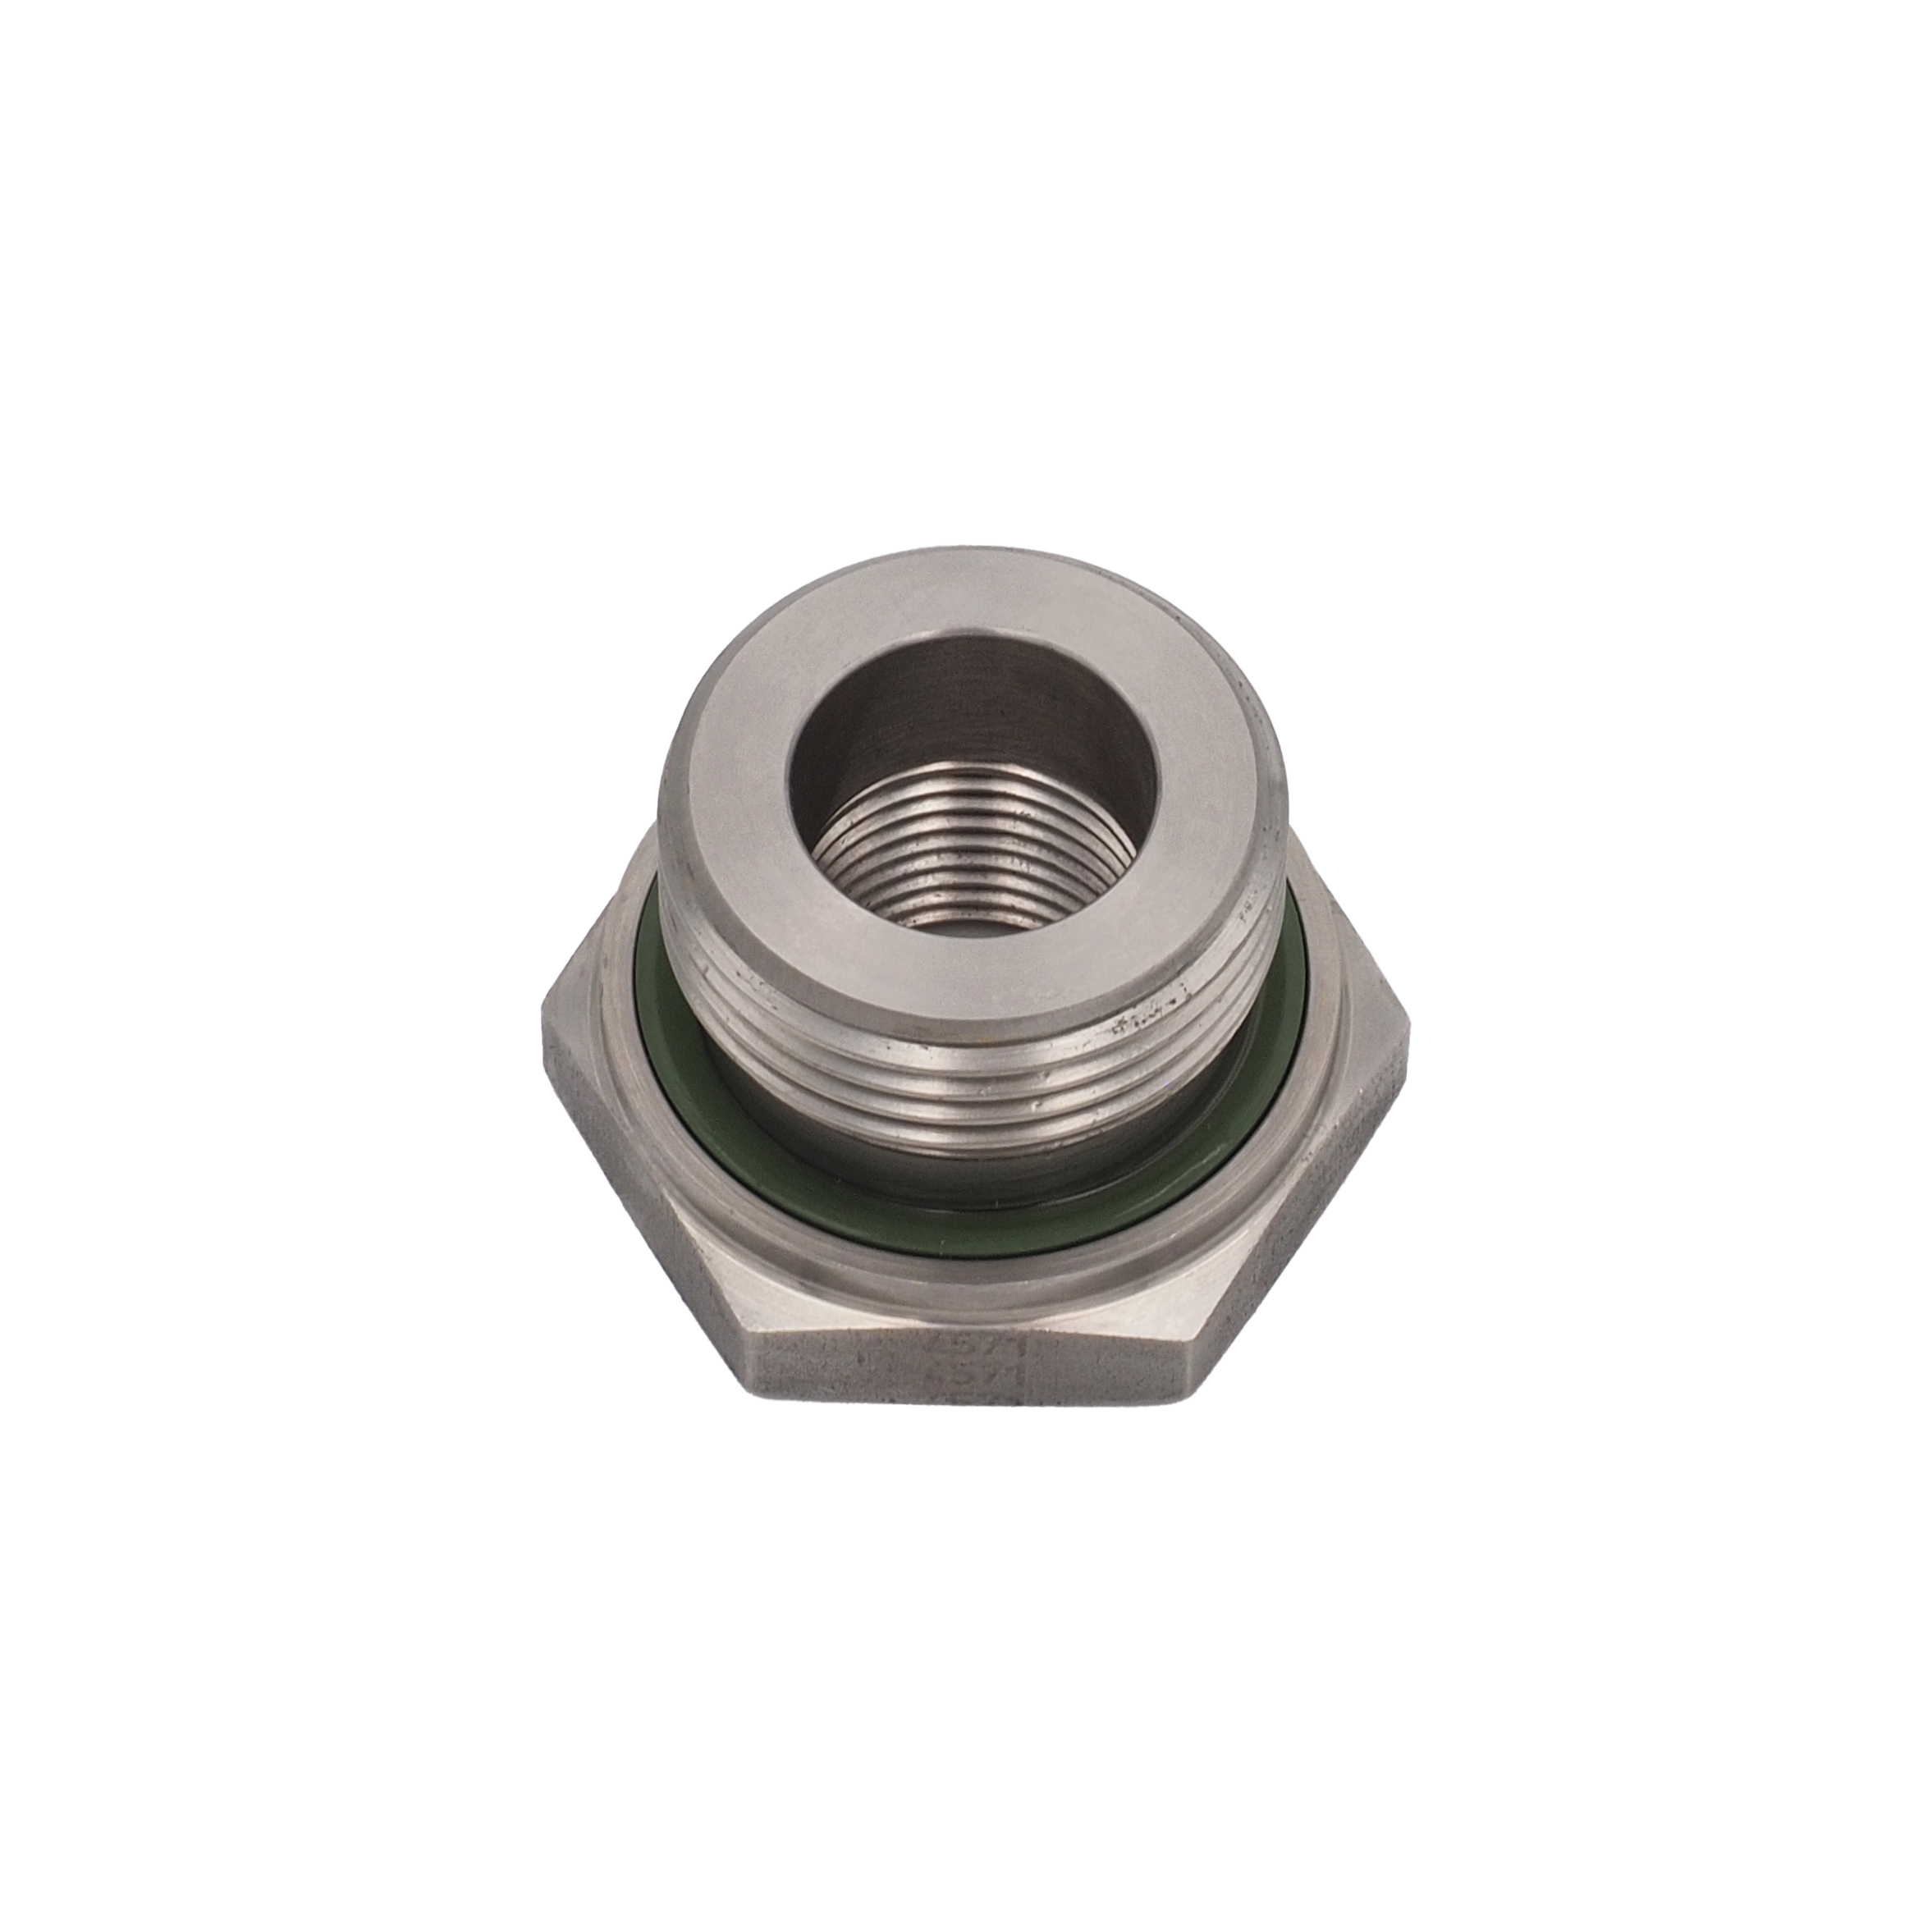 Reducer ET 1" - IT 1/2", stainless steel